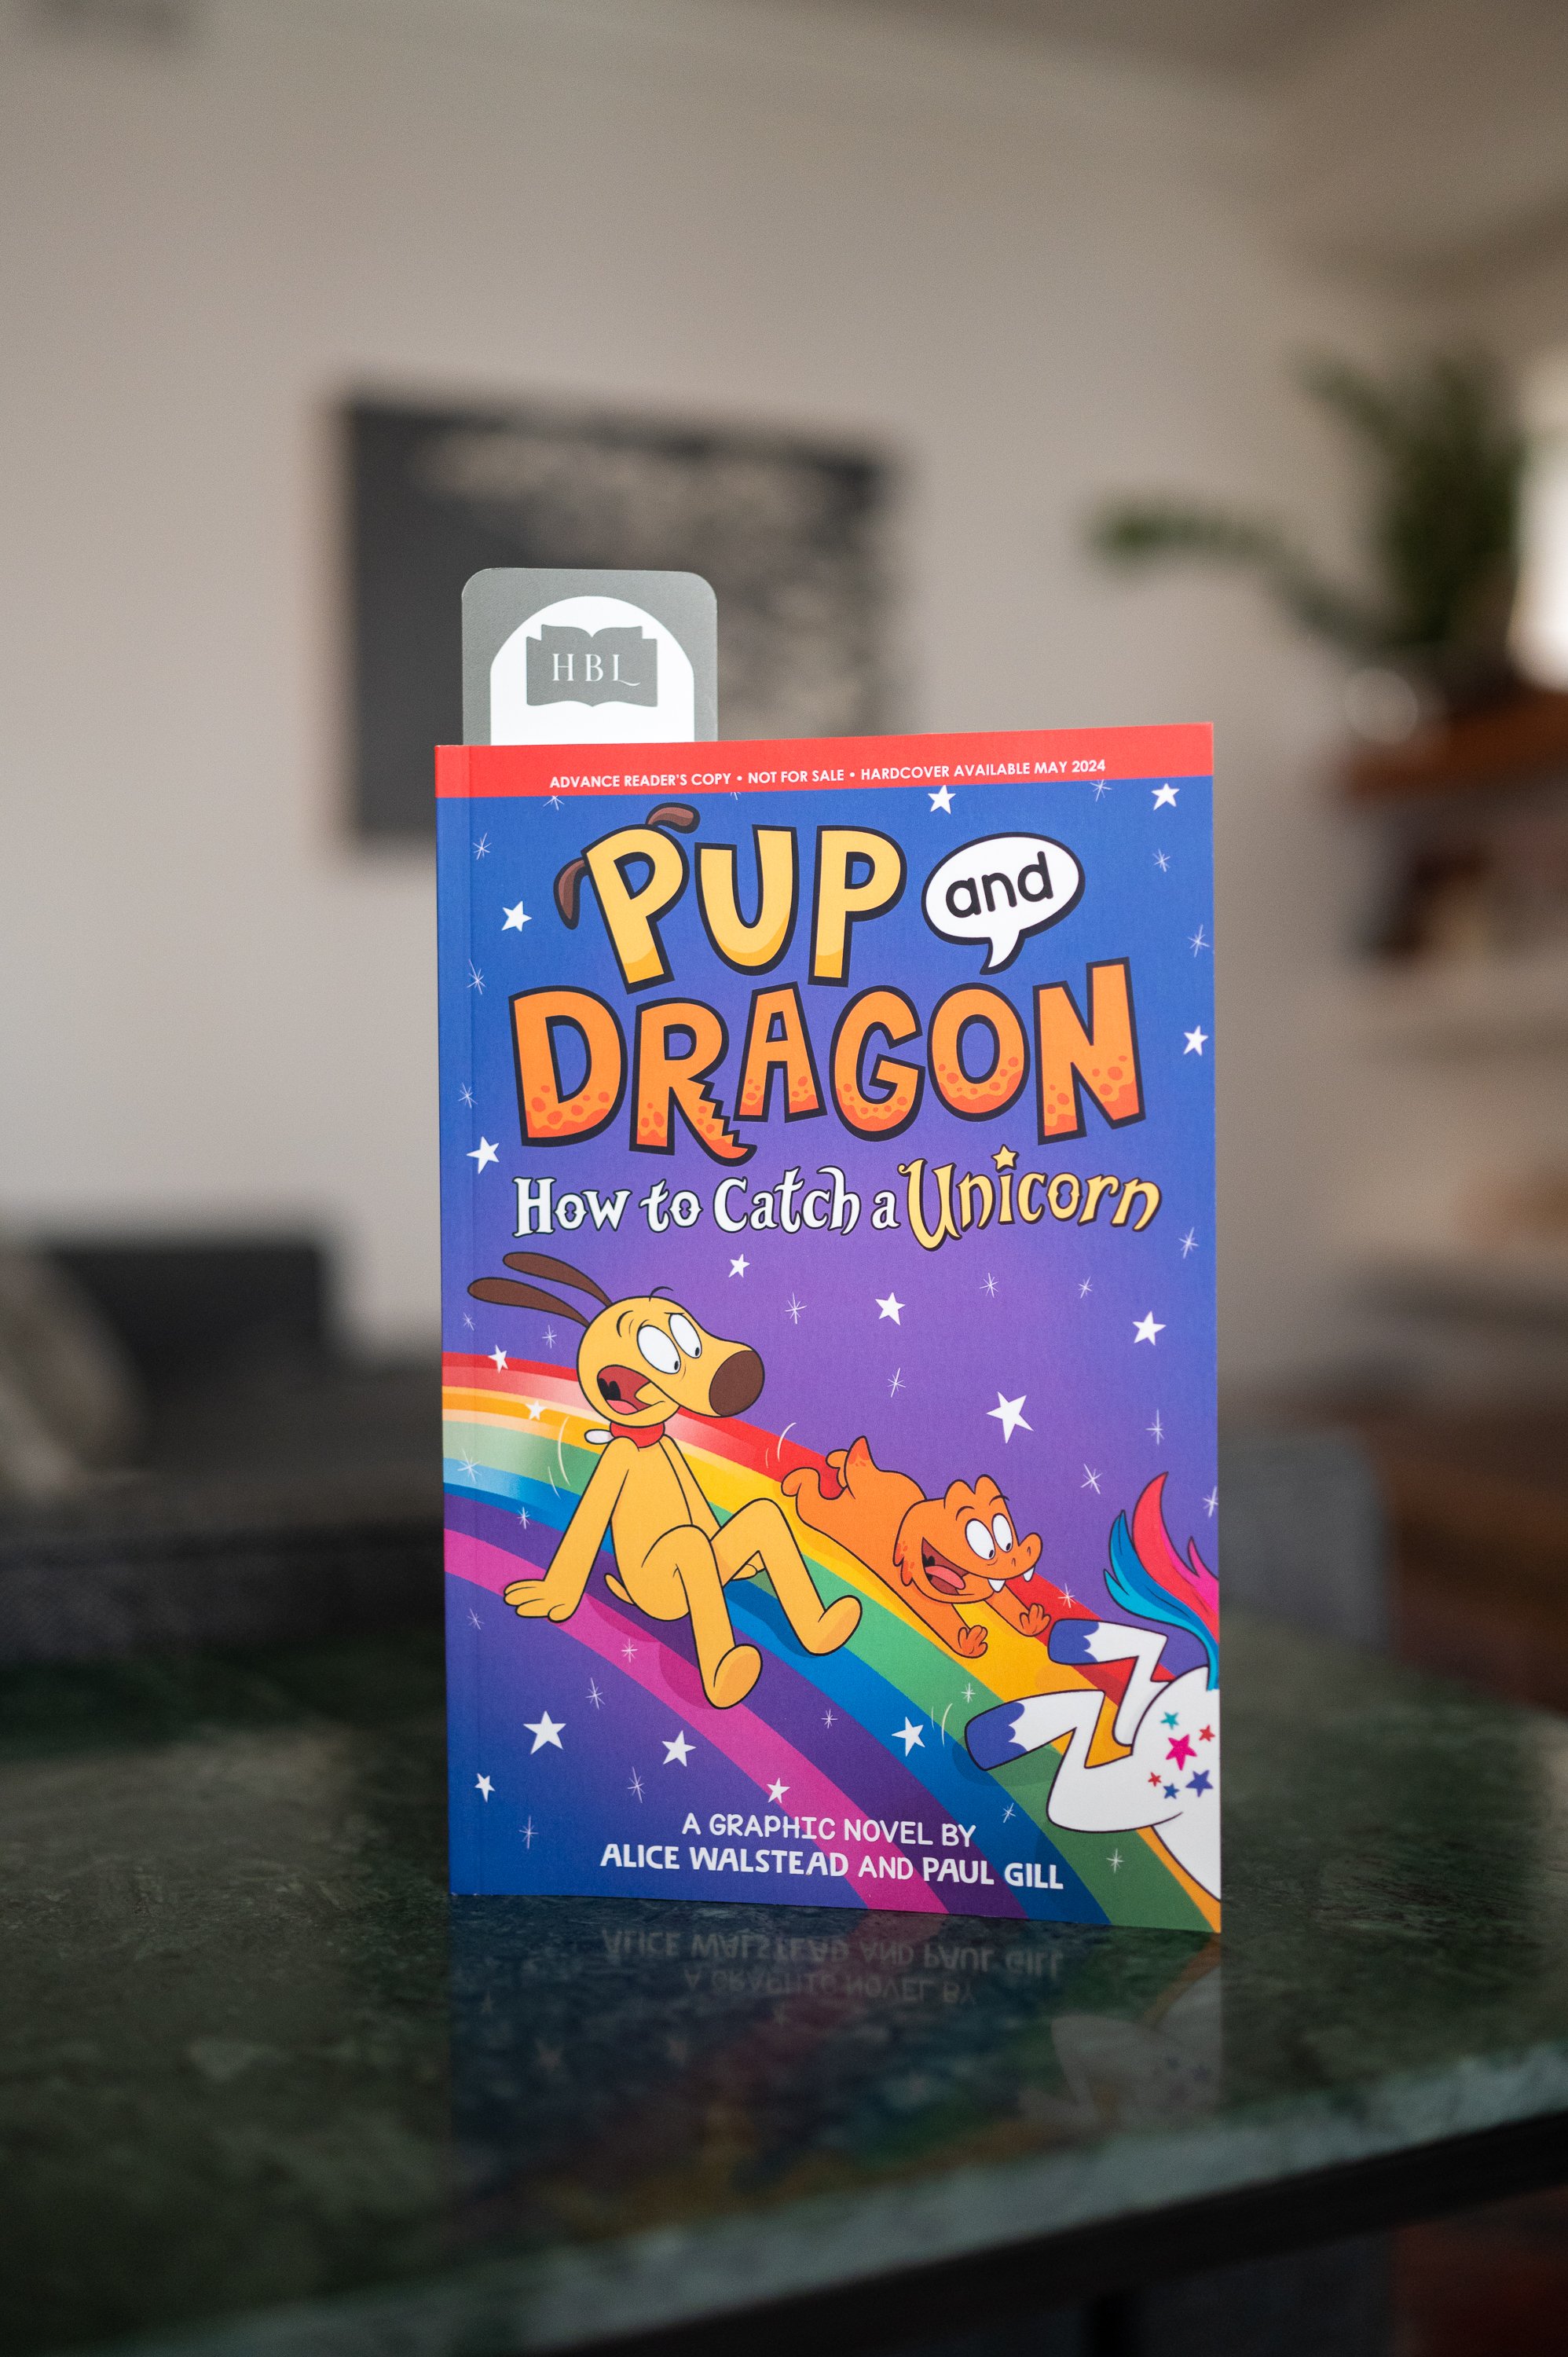 Pup and Dragon How to Catch a Unicorn by Alice Walstead and Paul Gill.jpg